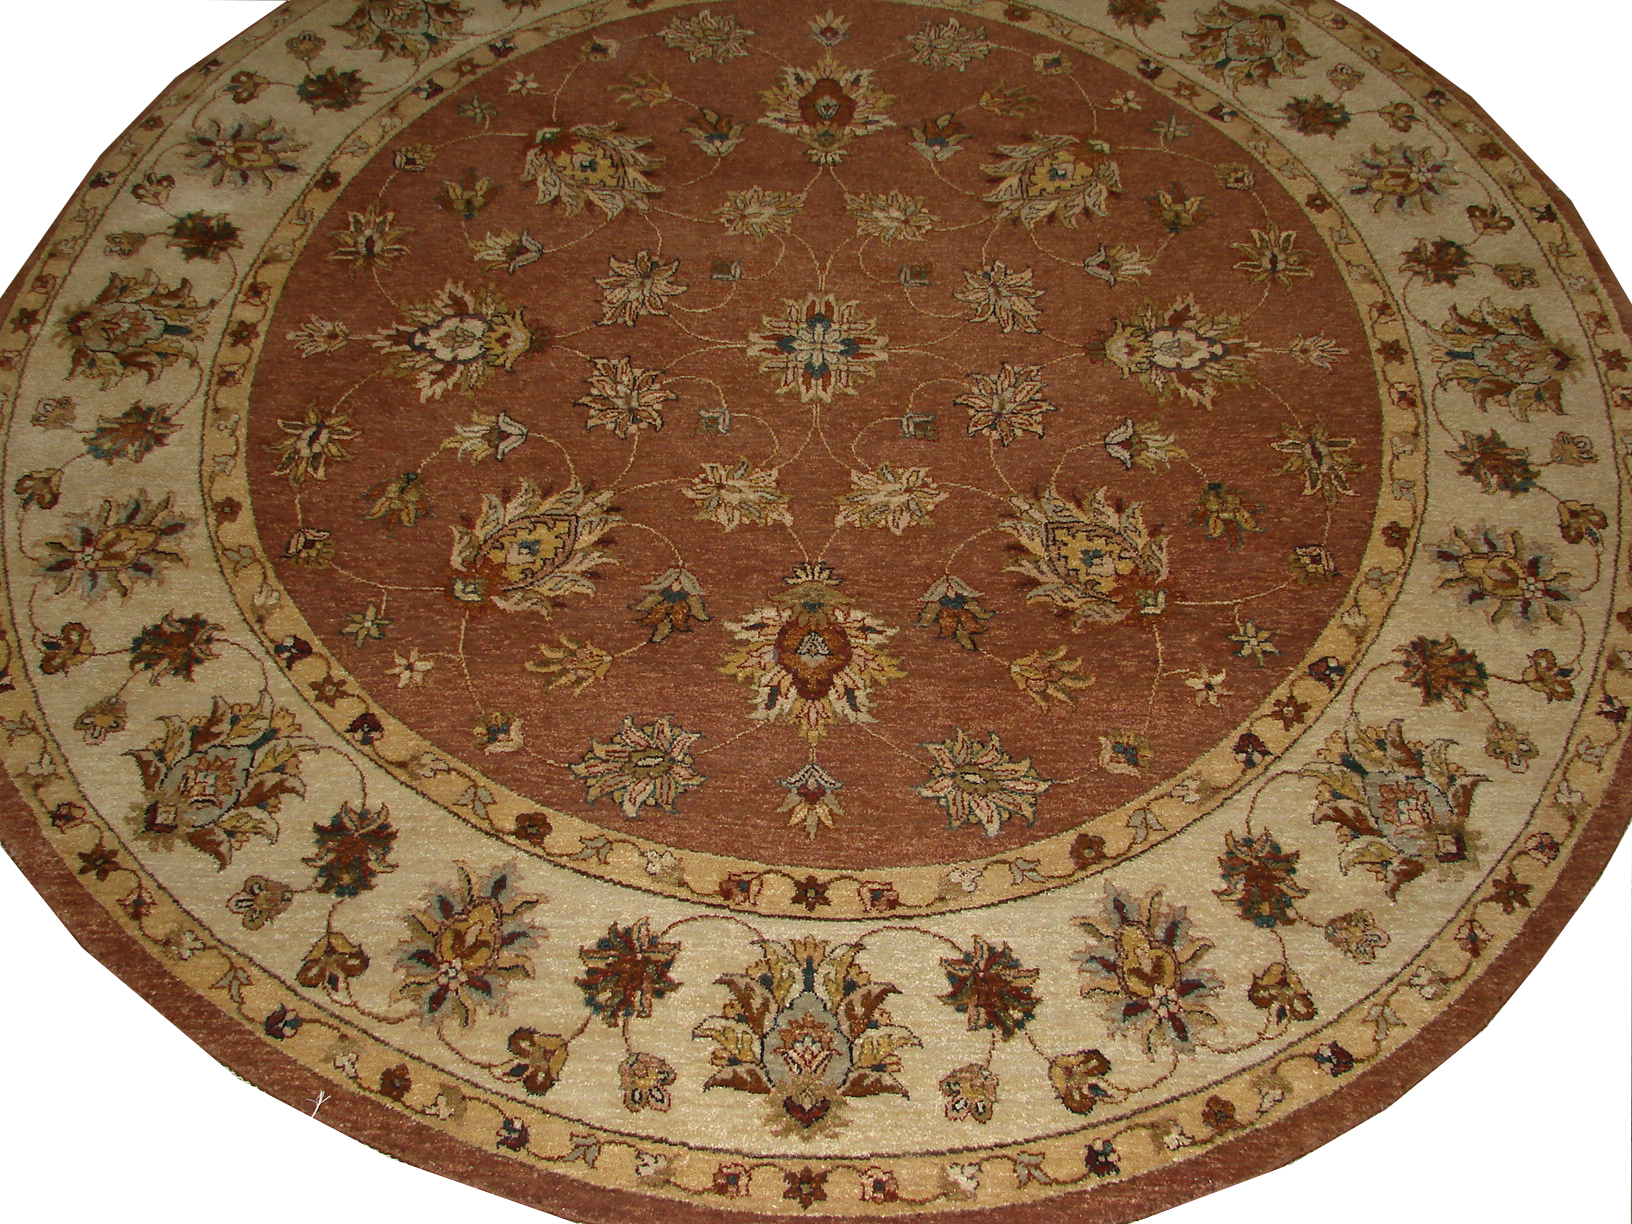 Clearance & Discount Rugs Sultan Collection Hand Knotted Wool Rug 9628 Lt. Brown - Chocolate & Ivory - Beige Hand Knotted Rug